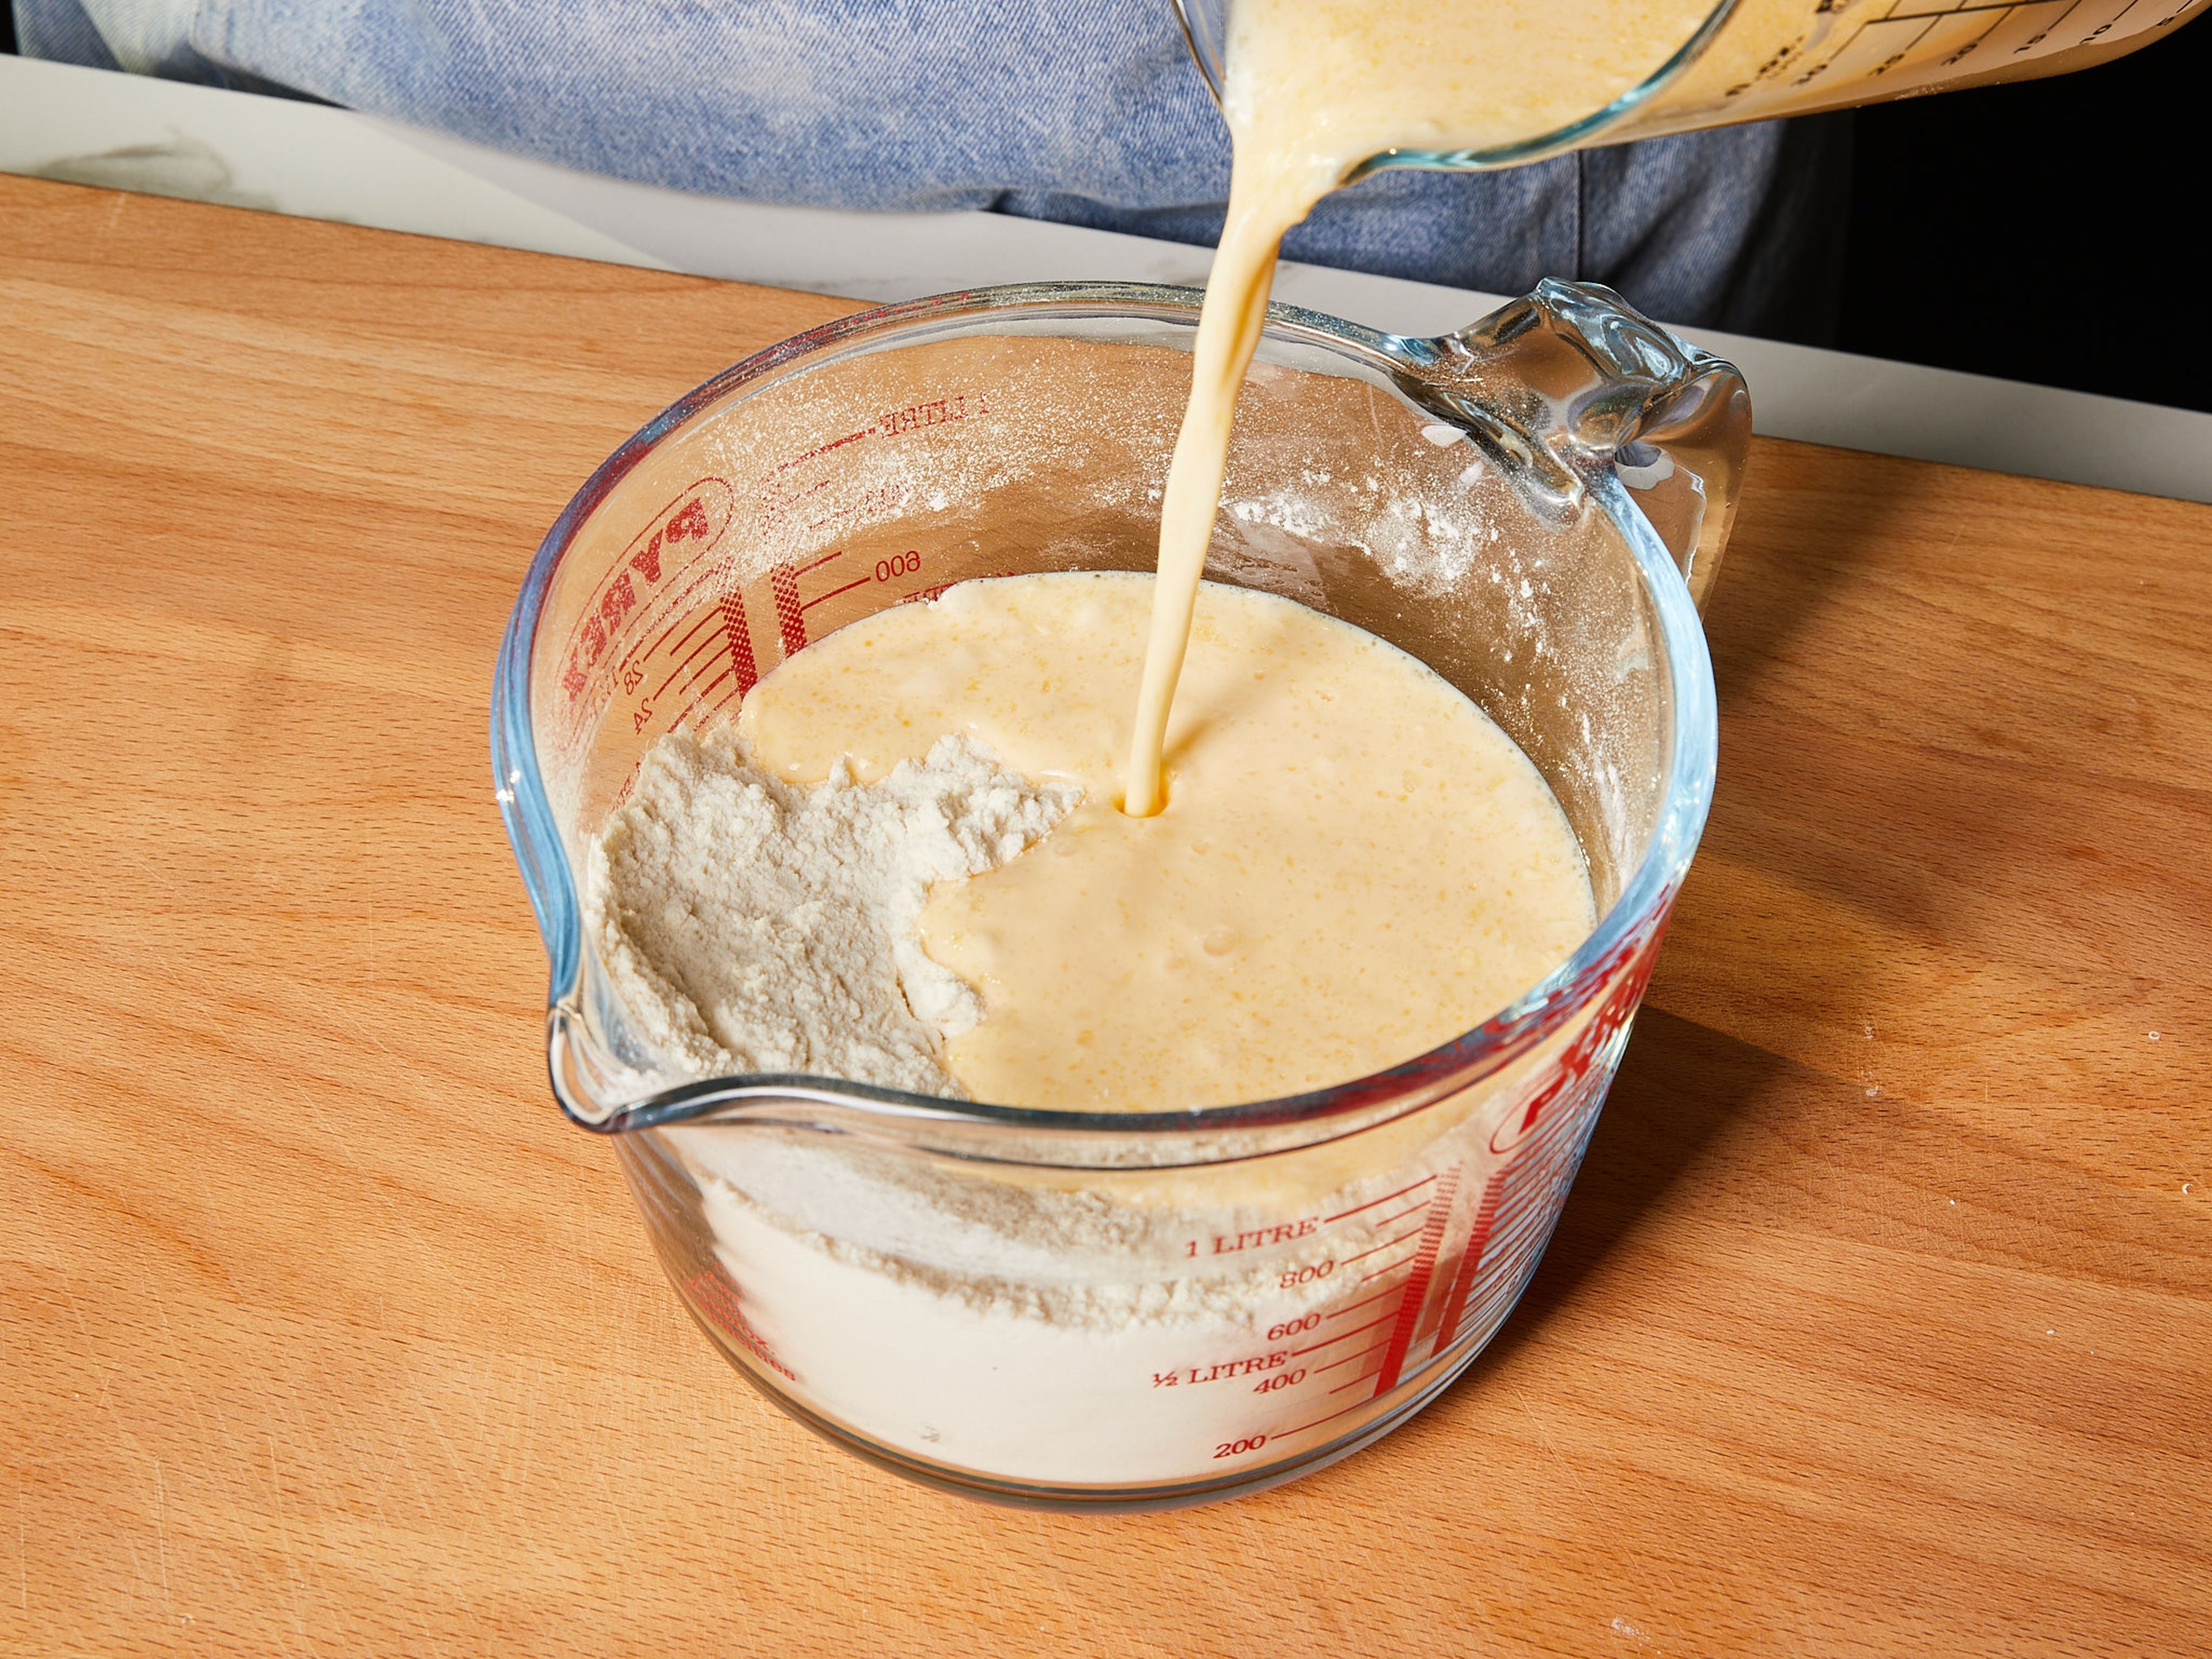 Now pour the liquid mixture into the dry ingredients in the large measuring cup and mix until everything is just combined – it should look a little lumpy.